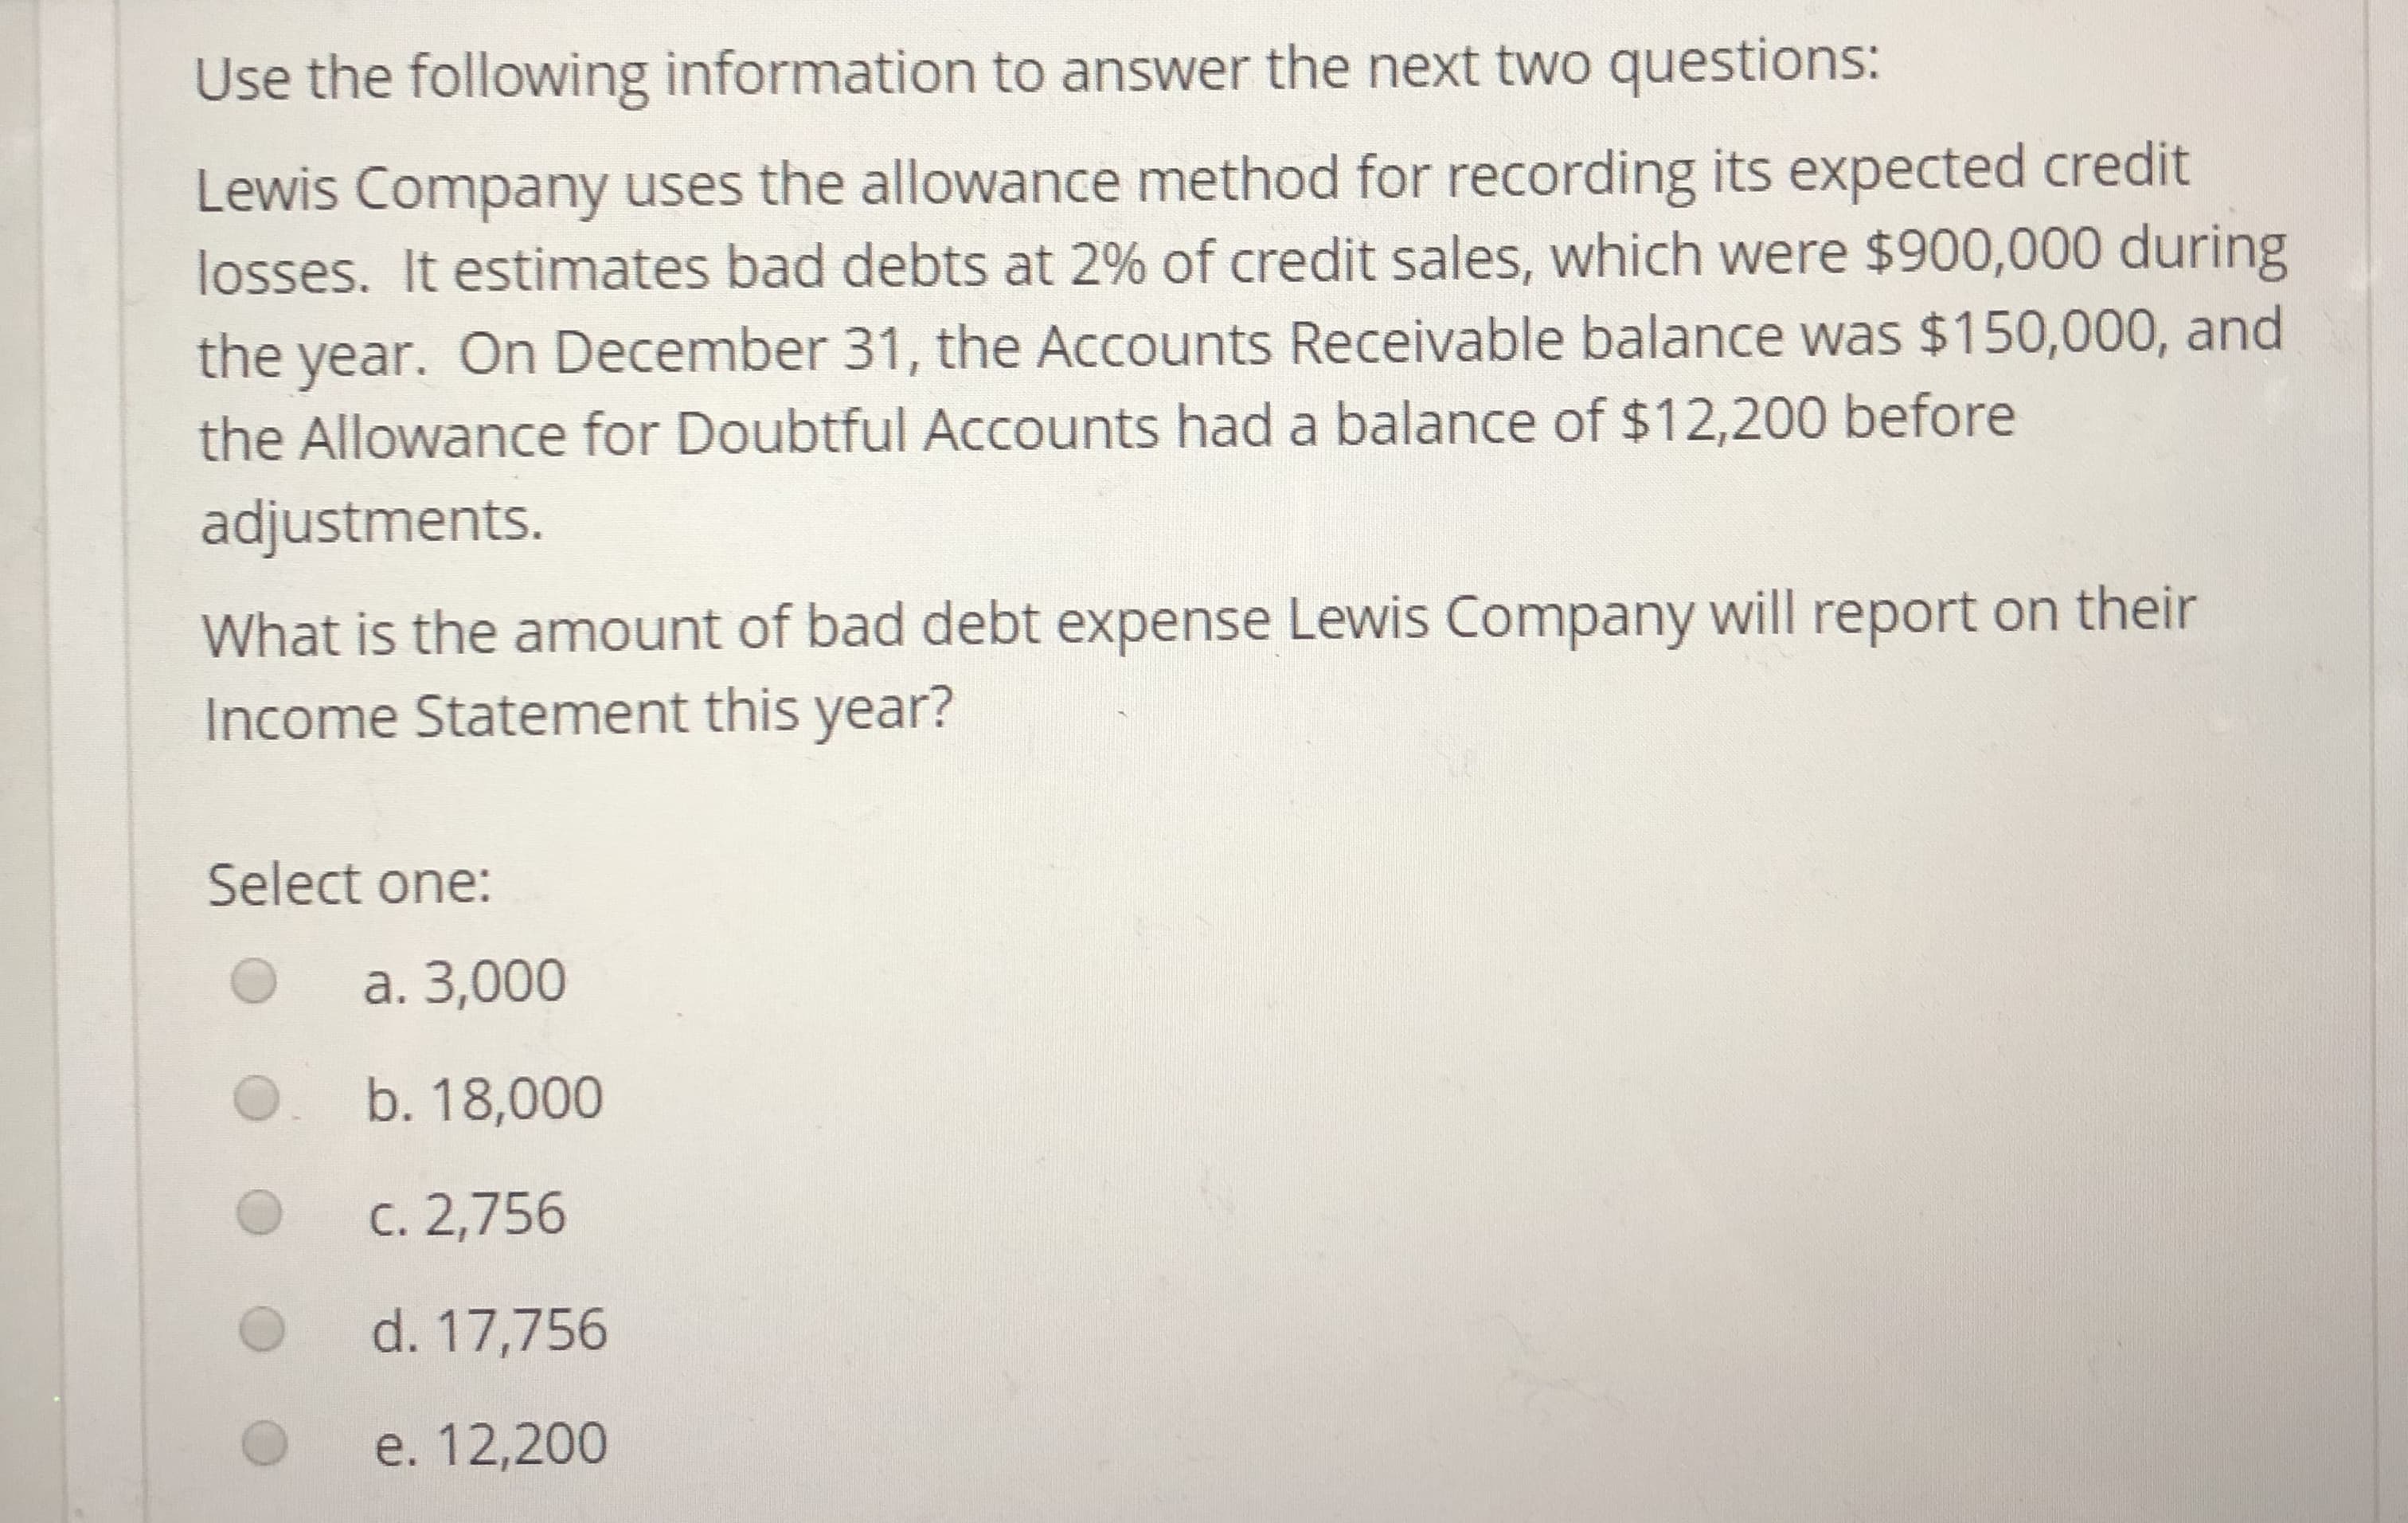 Use the following information to answer the next two questions:
Lewis Company uses the allowance method for recording its expected credit
losses. It estimates bad debts at 2% of credit sales, which were $900,000 during
the year. On December 31, the Accounts Receivable balance was $150,000, and
the Allowance for Doubtful Accounts had a balance of $12,200 before
adjustments.
What is the amount of bad debt expense Lewis Company will report on their
Income Statement this year?
Select one:
O
a. 3,000
b. 18,000
C. 2,756
d. 17,756
O e. 12,200
